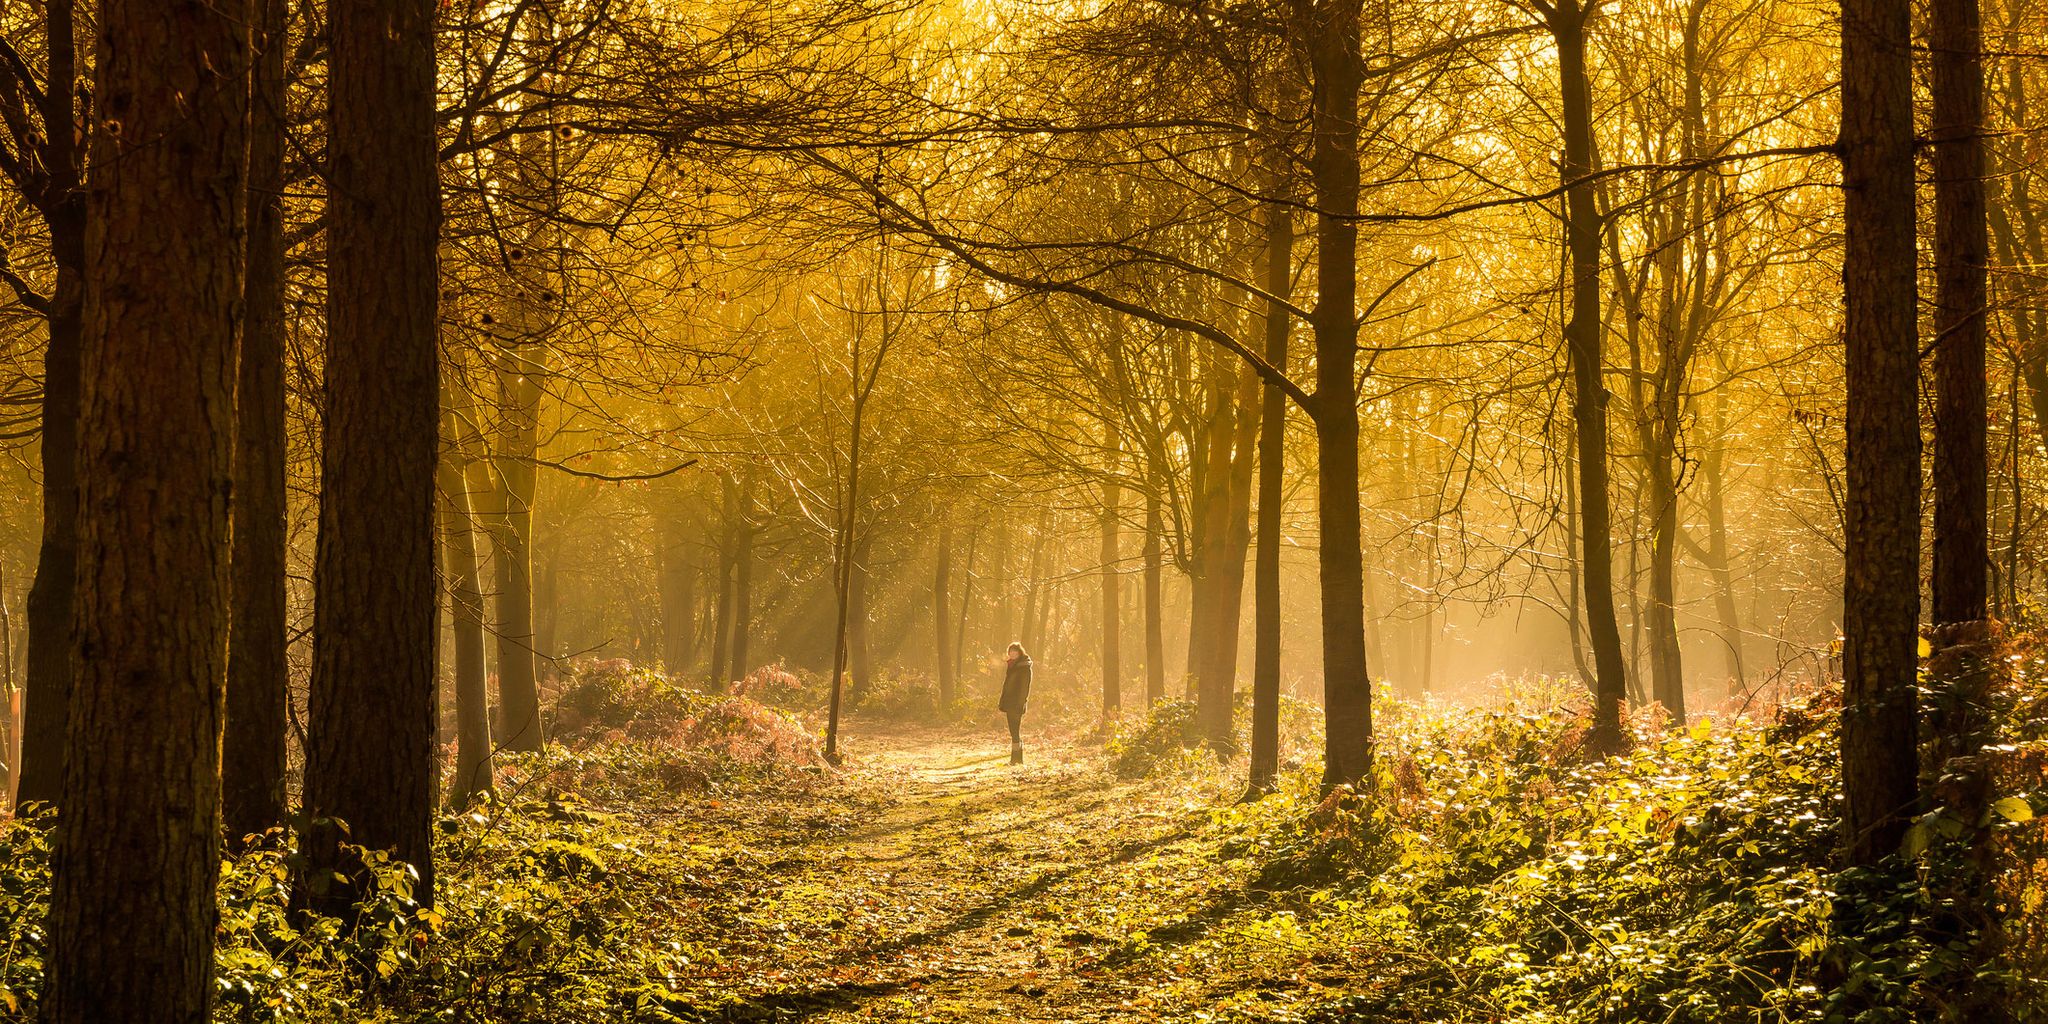 Natural landscape, Nature, People in nature, Tree, Forest, Sunlight, Natural environment, Woodland, Atmospheric phenomenon, Yellow, 